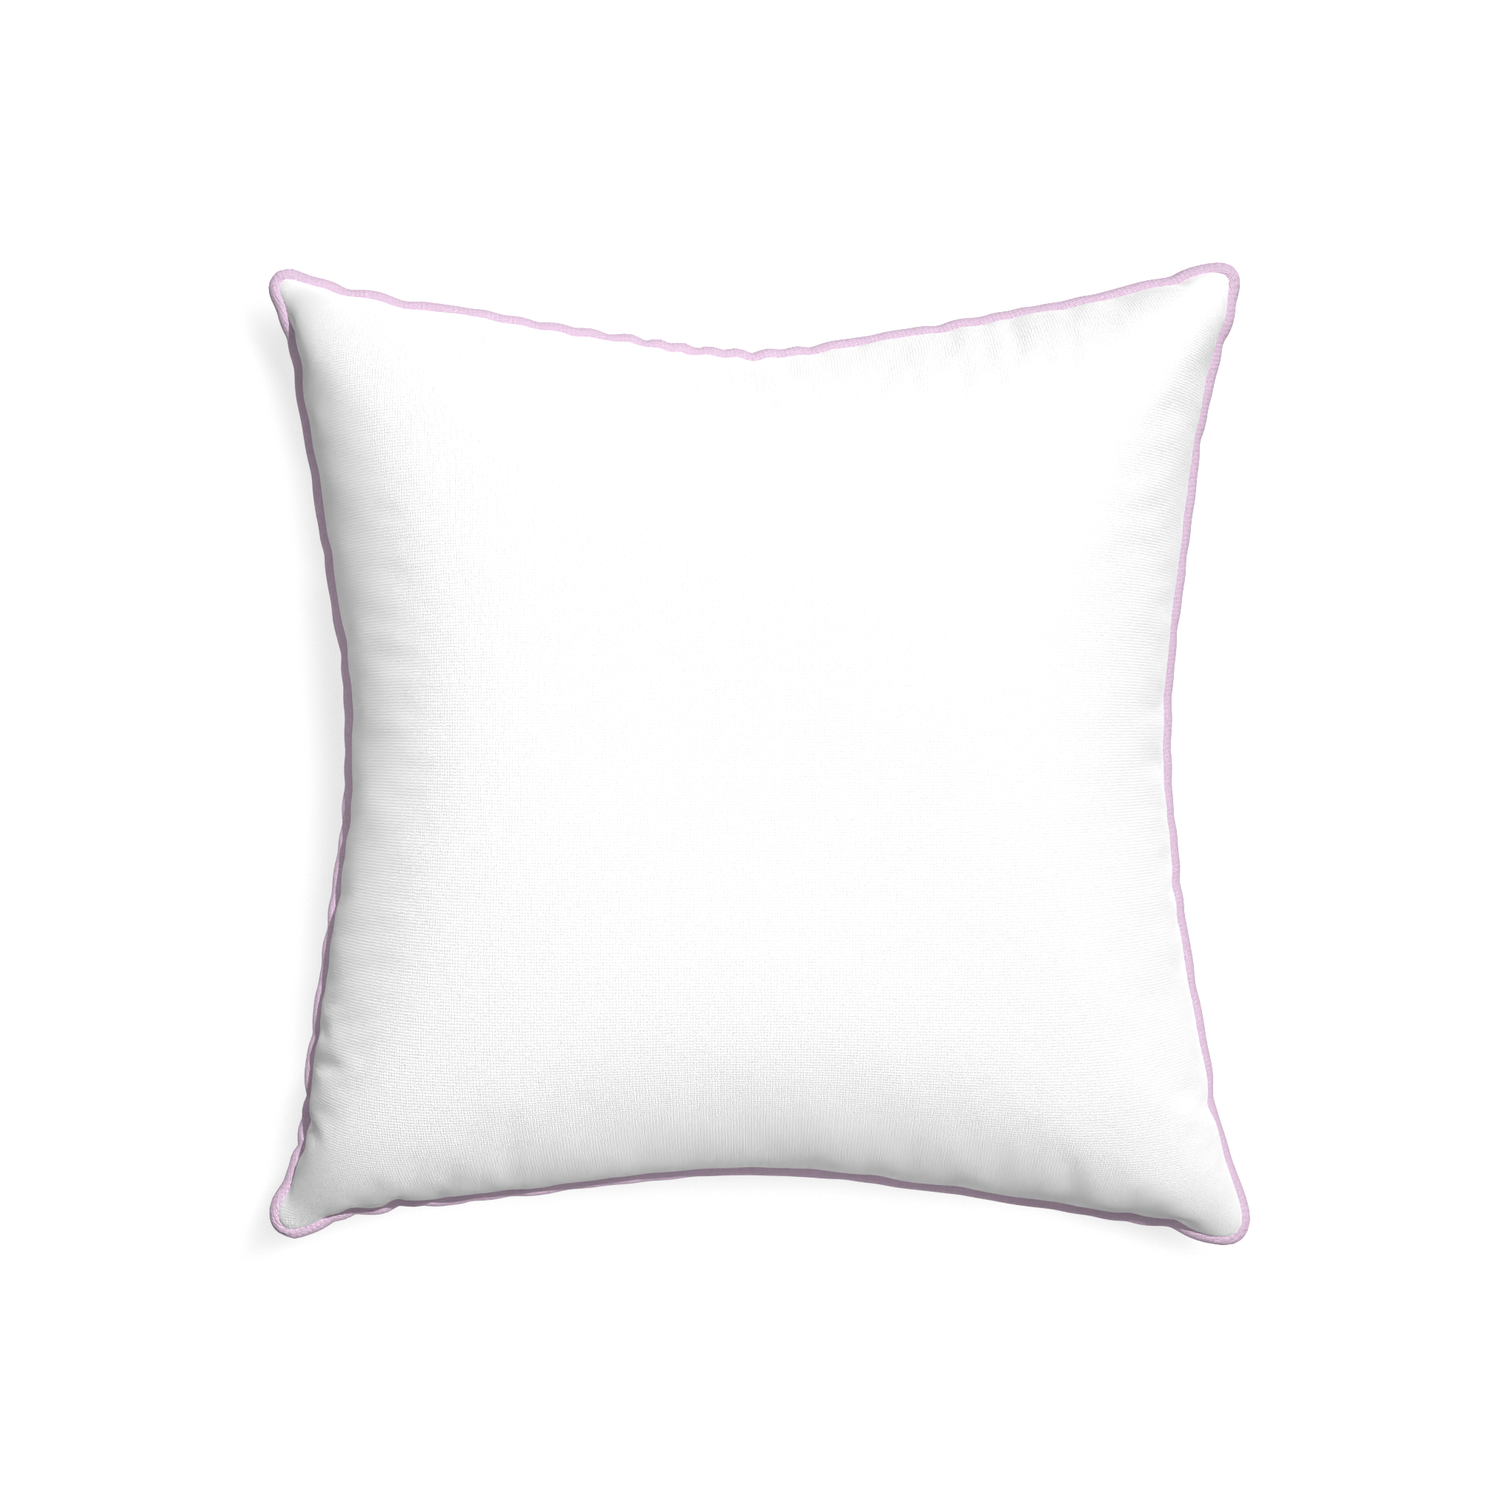 22-square snow custom white cottonpillow with l piping on white background